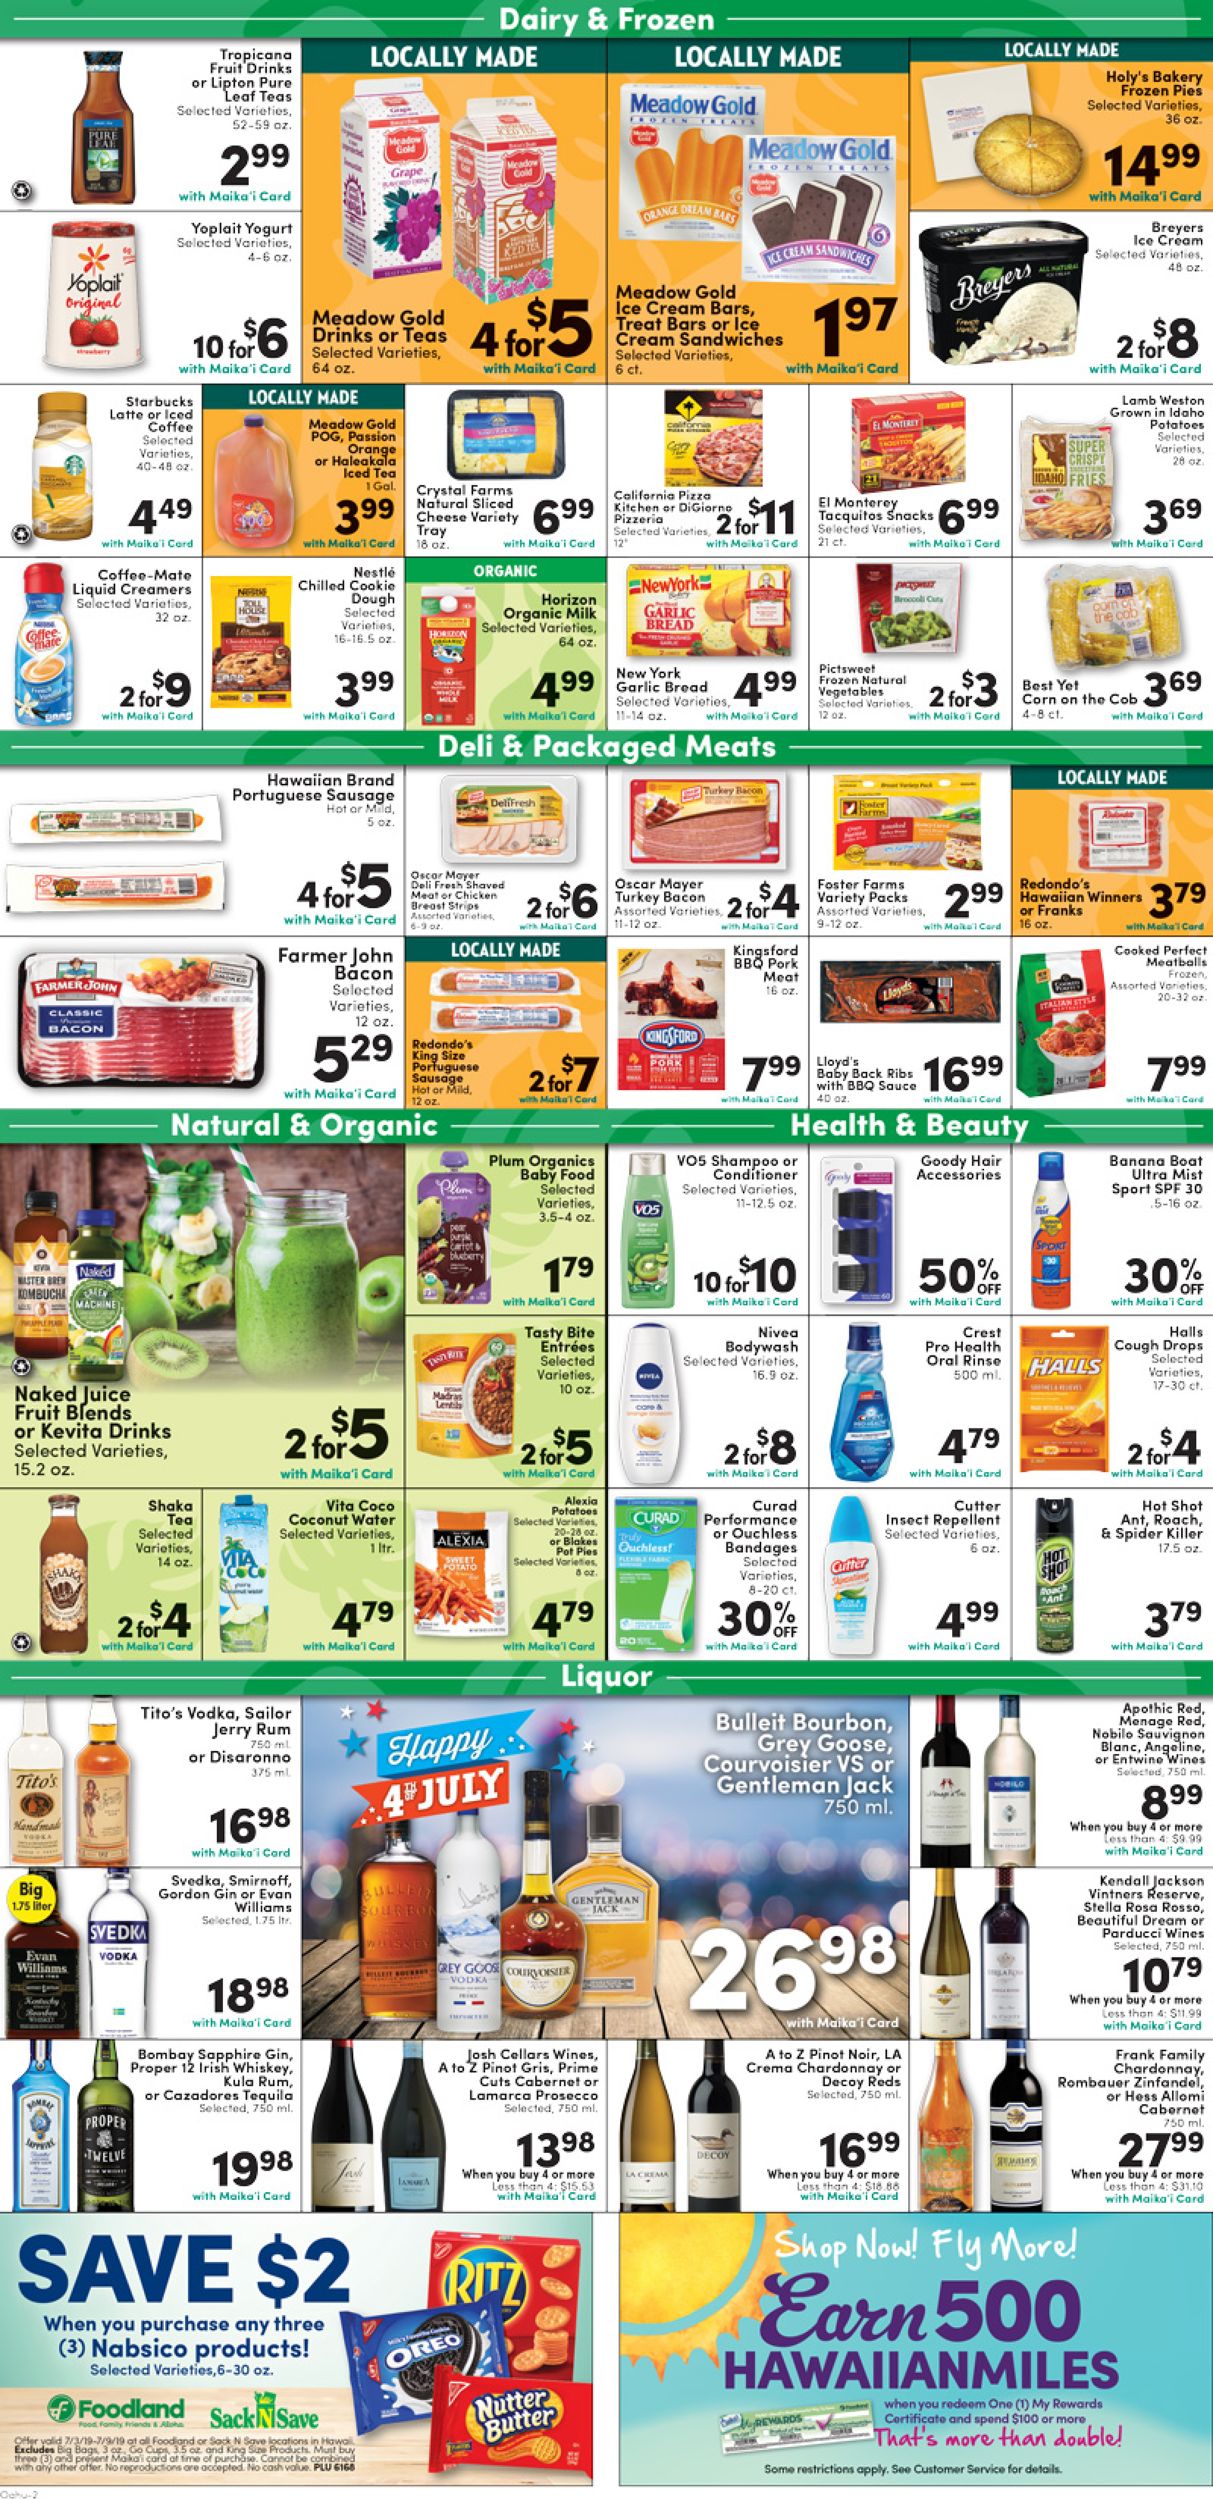 Catalogue Foodland from 07/03/2019